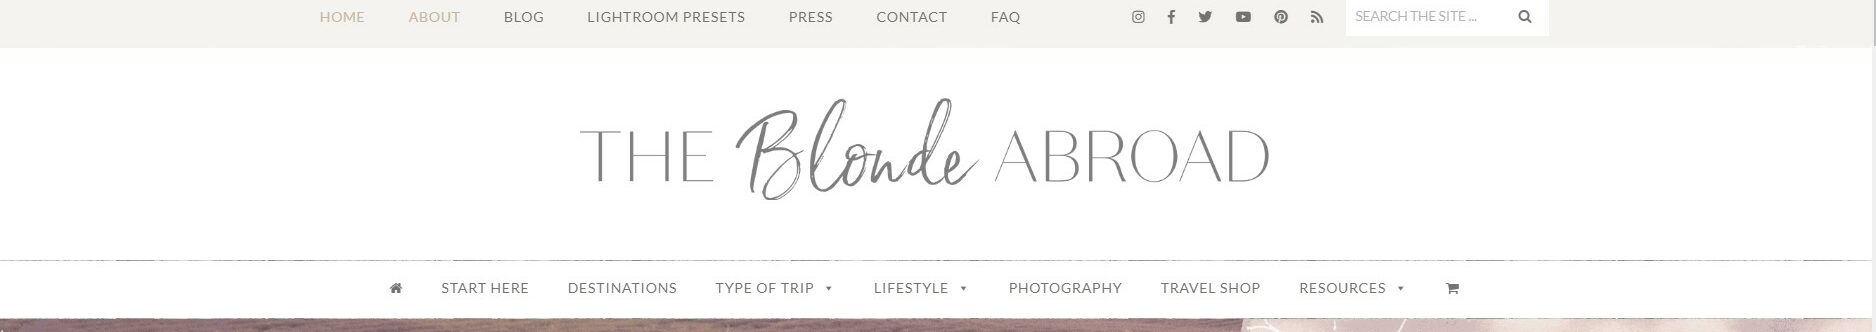 the-blonde-abroad-travel-and-jet-set-lifestyle-blog